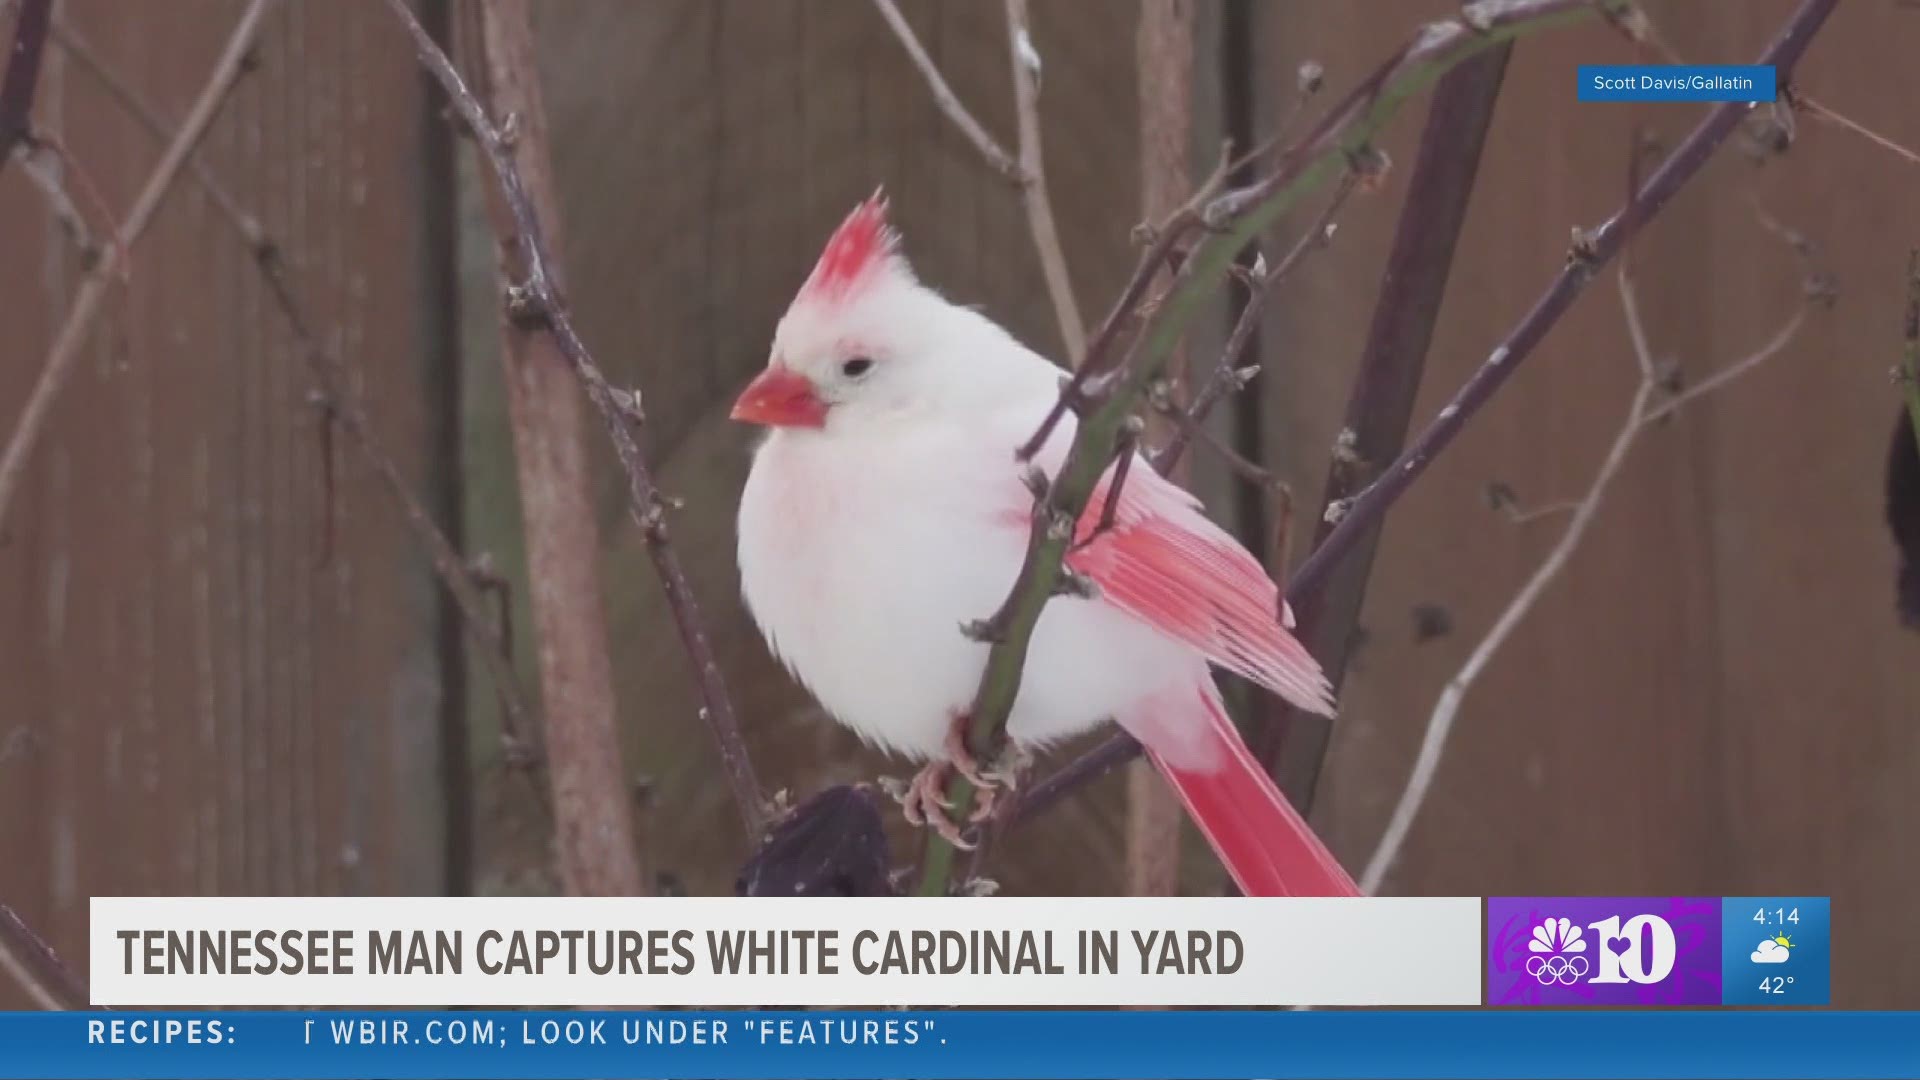 Video from Gallatin, Tennessee used with permission of Scott Davis. He captured this beautiful cardinal in his yard. Feb. 19, 2021-4pm.